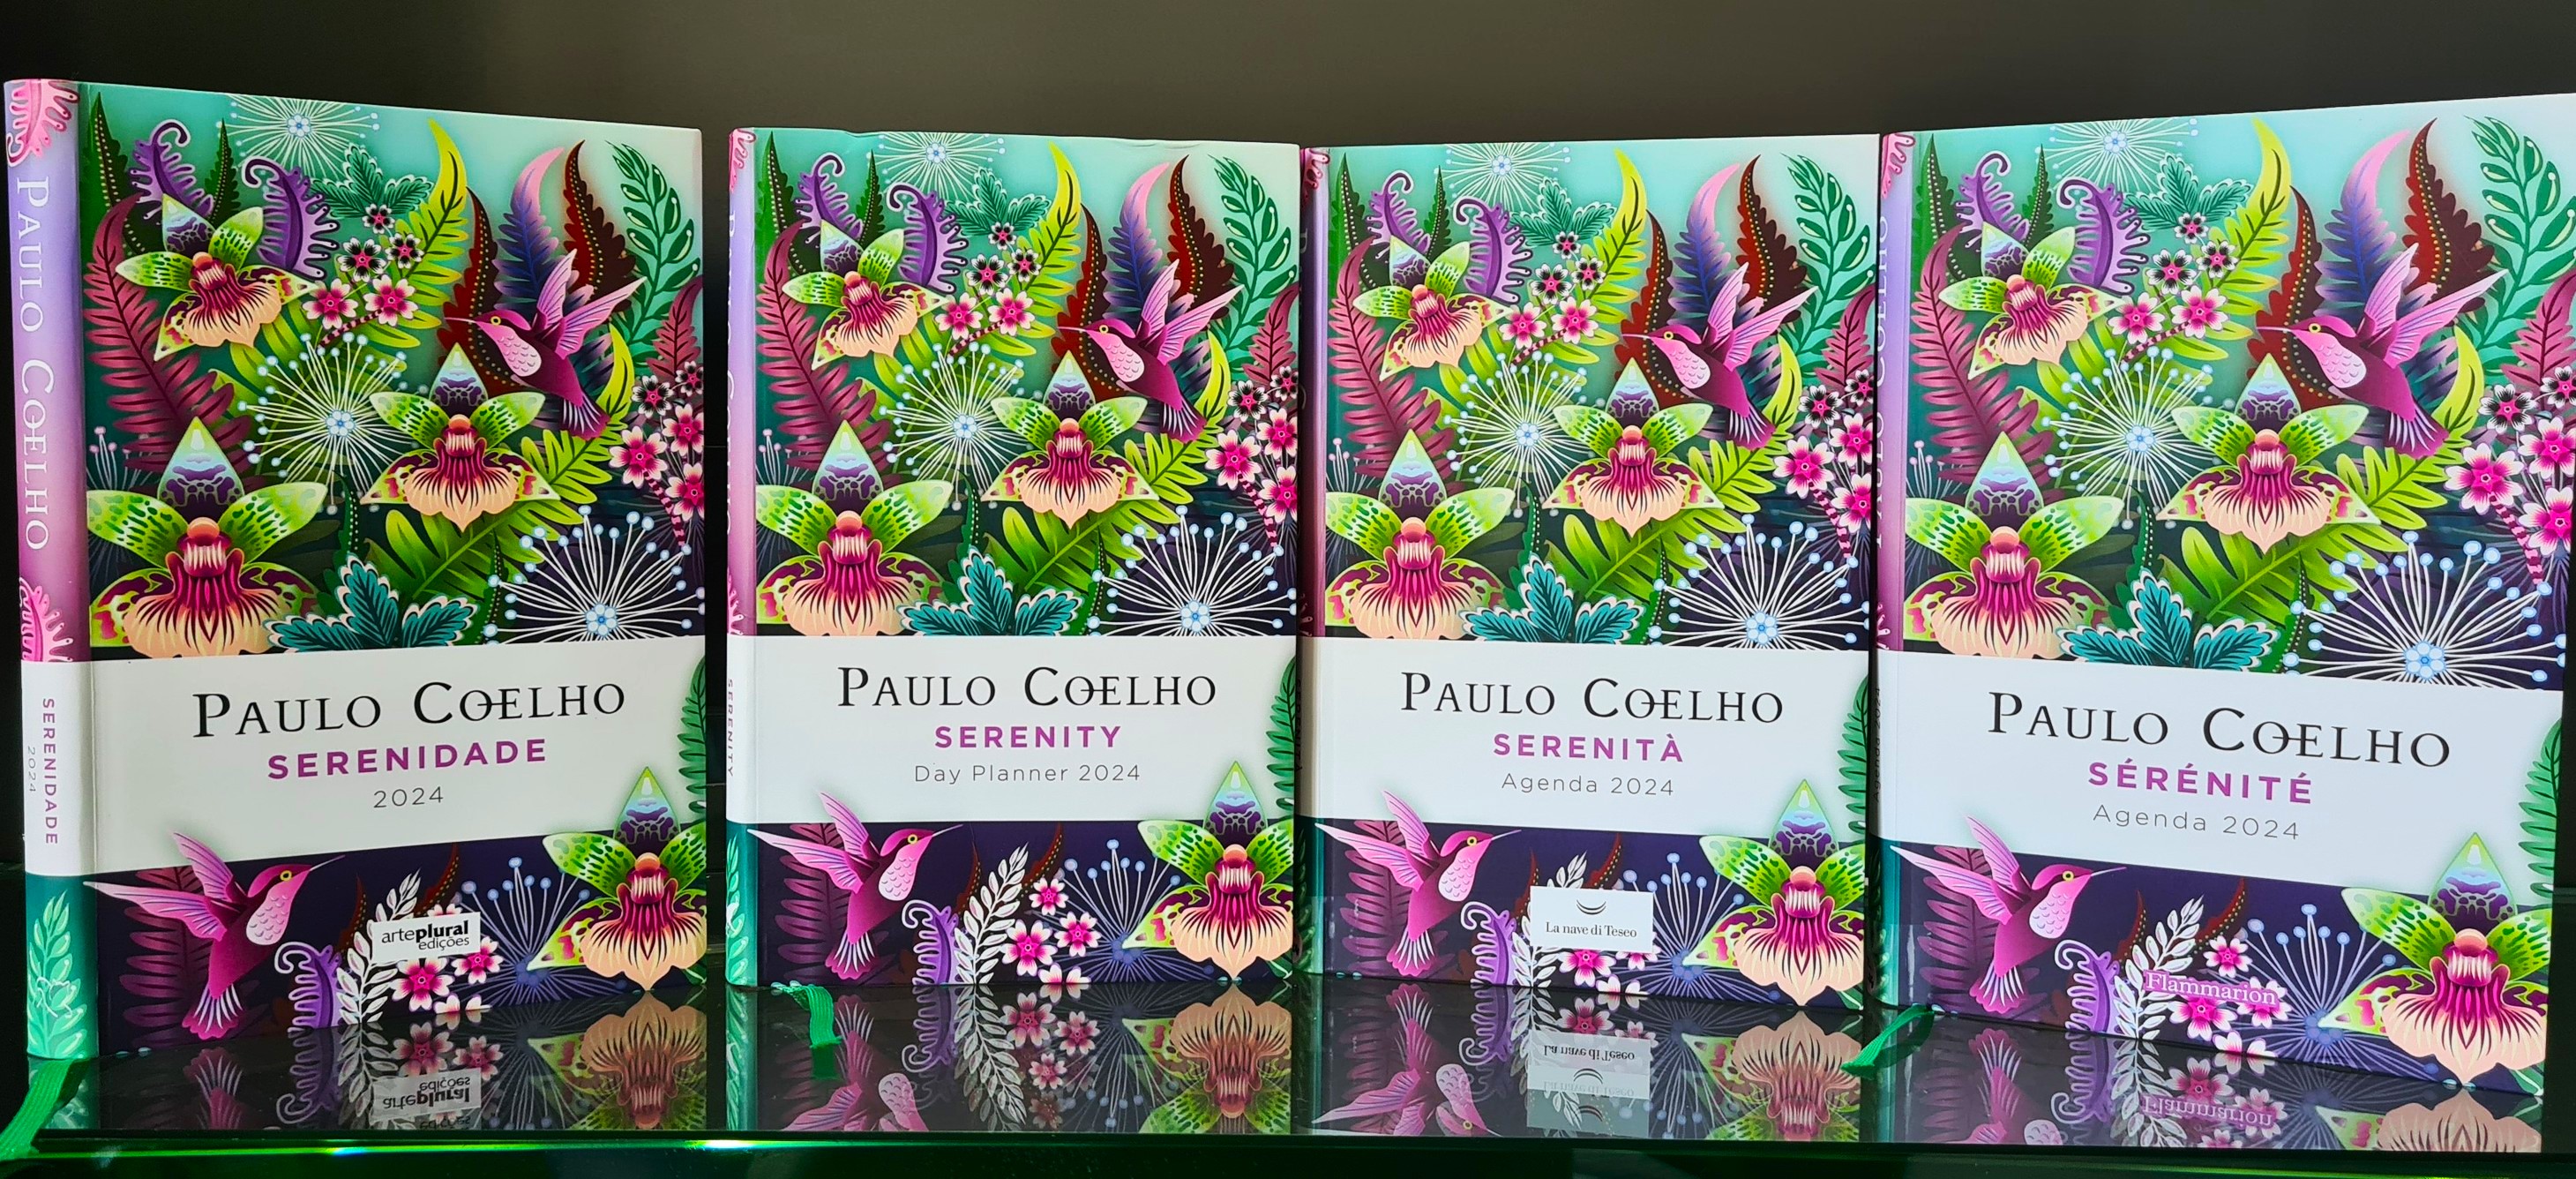 Paulo Coelho - The 2024 edition, Serenity, is coming out in 20